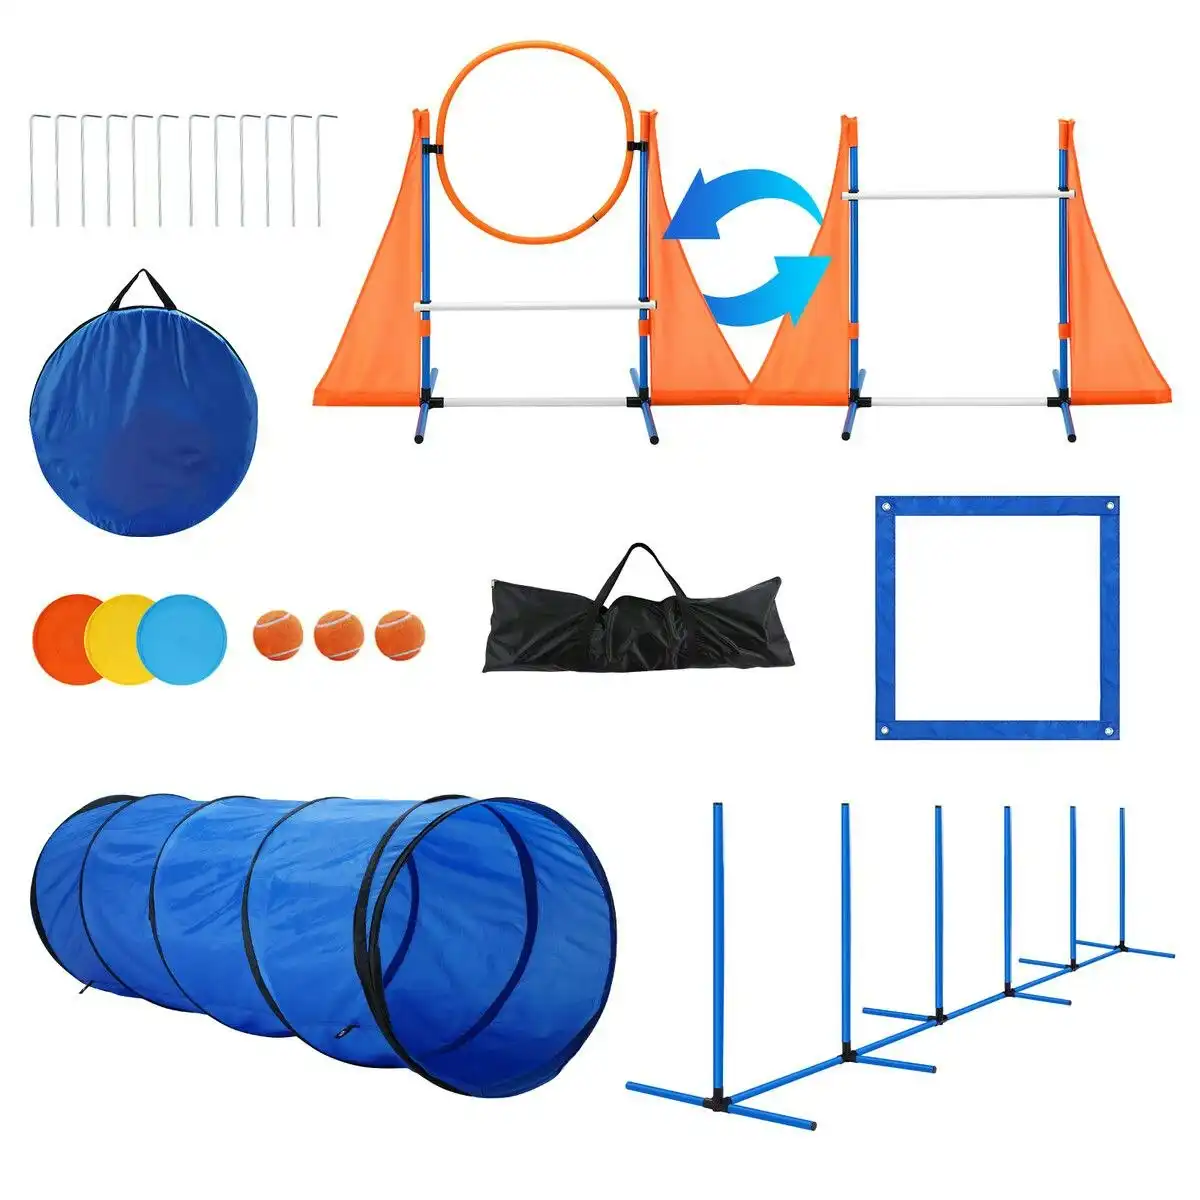 Pet Scene Dog Agility Equipment Obstacle Training Course 7 Set Pet Toys Supplies Hurdle Jump Tire Tunnel Pause Box Weave Poles Frisbees Balls Carry Bags